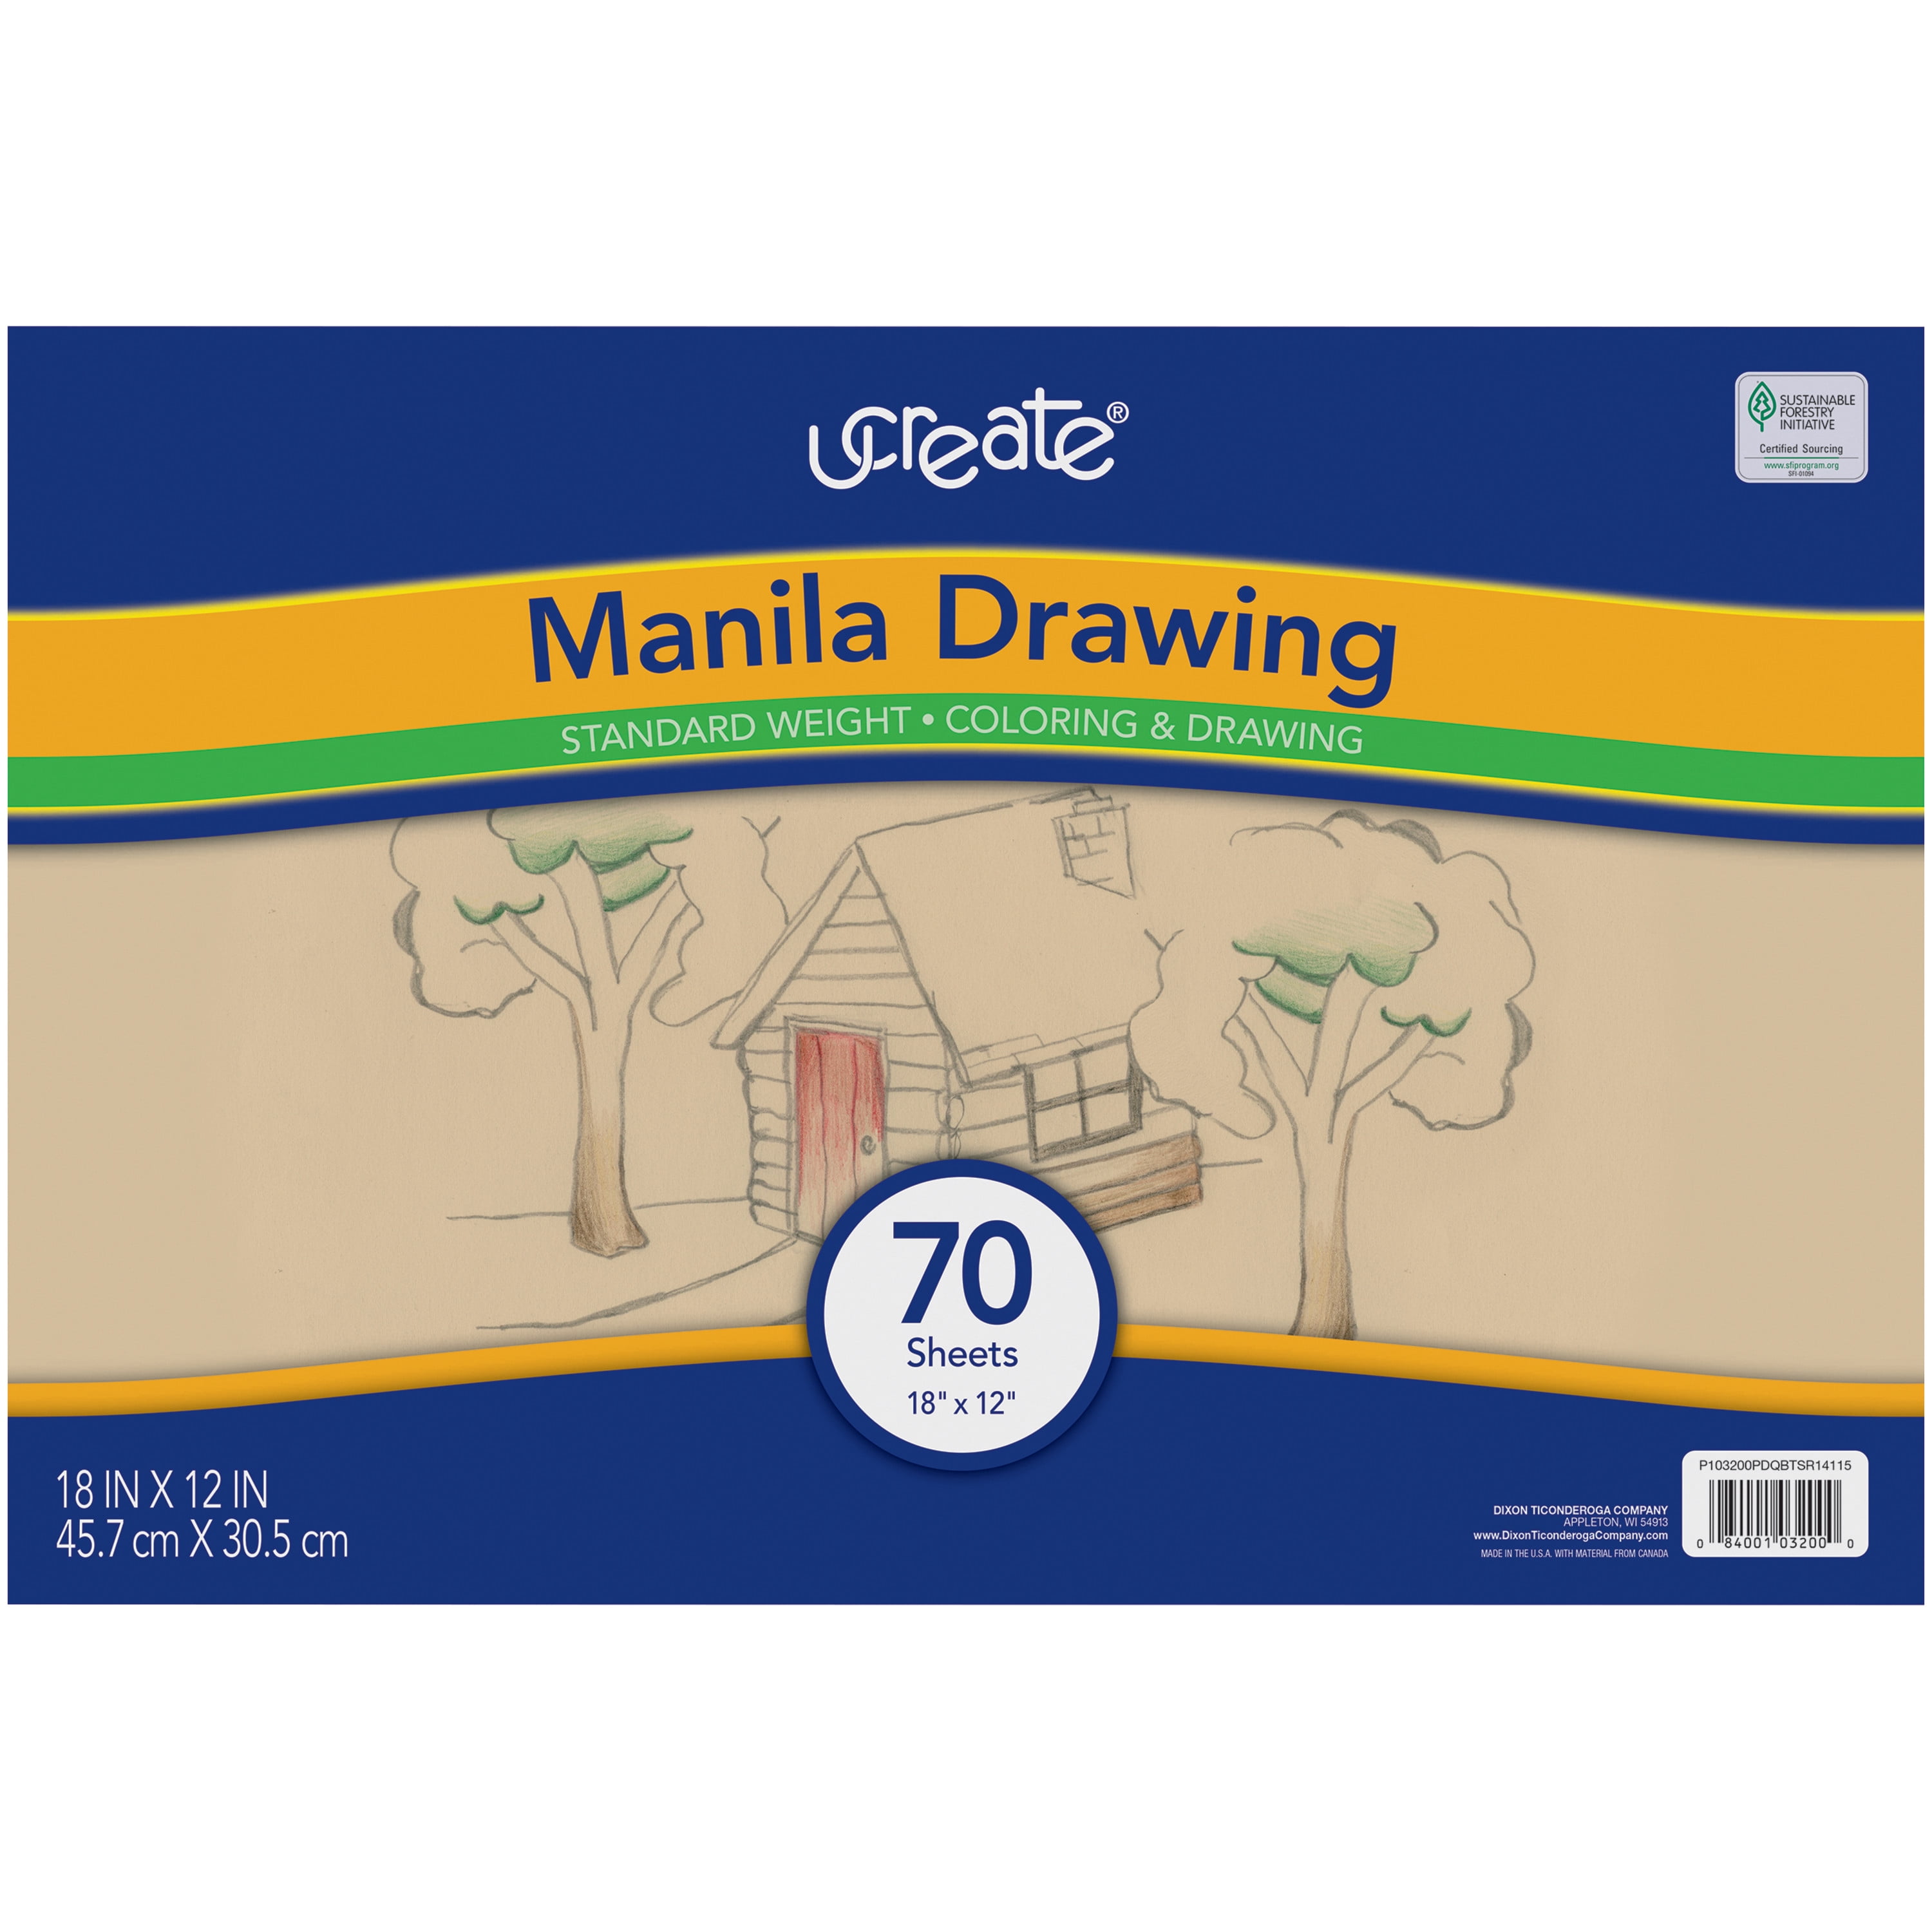 Ucreate Drawing Paper, Standard Weight, 9 in x 12 in, Manila, 70